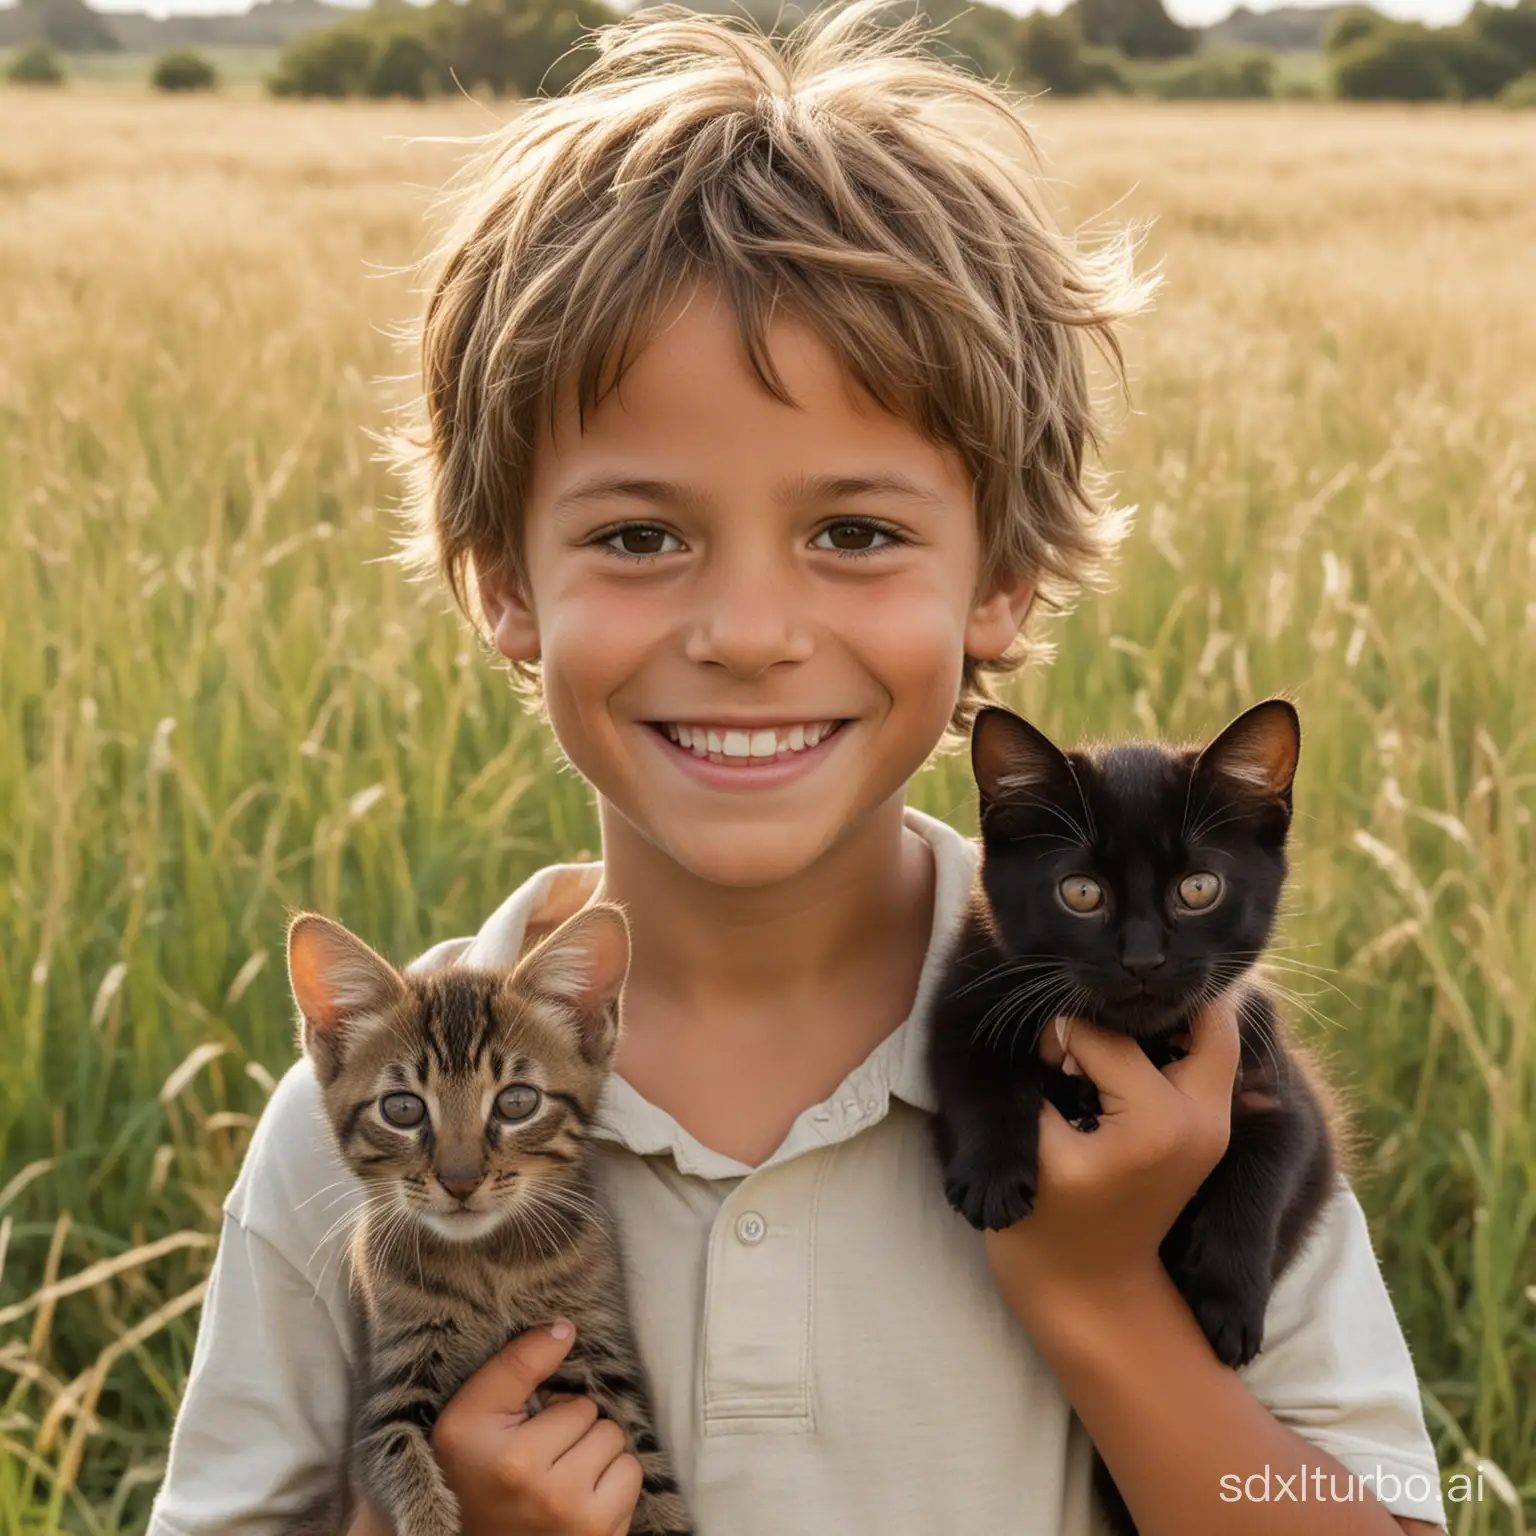 Two boys aged 7 and 5 years old, of African descent, with dark skin and brown-blond hair, smile while holding a mouse, with a background of grassland. Behind them are two black cats.